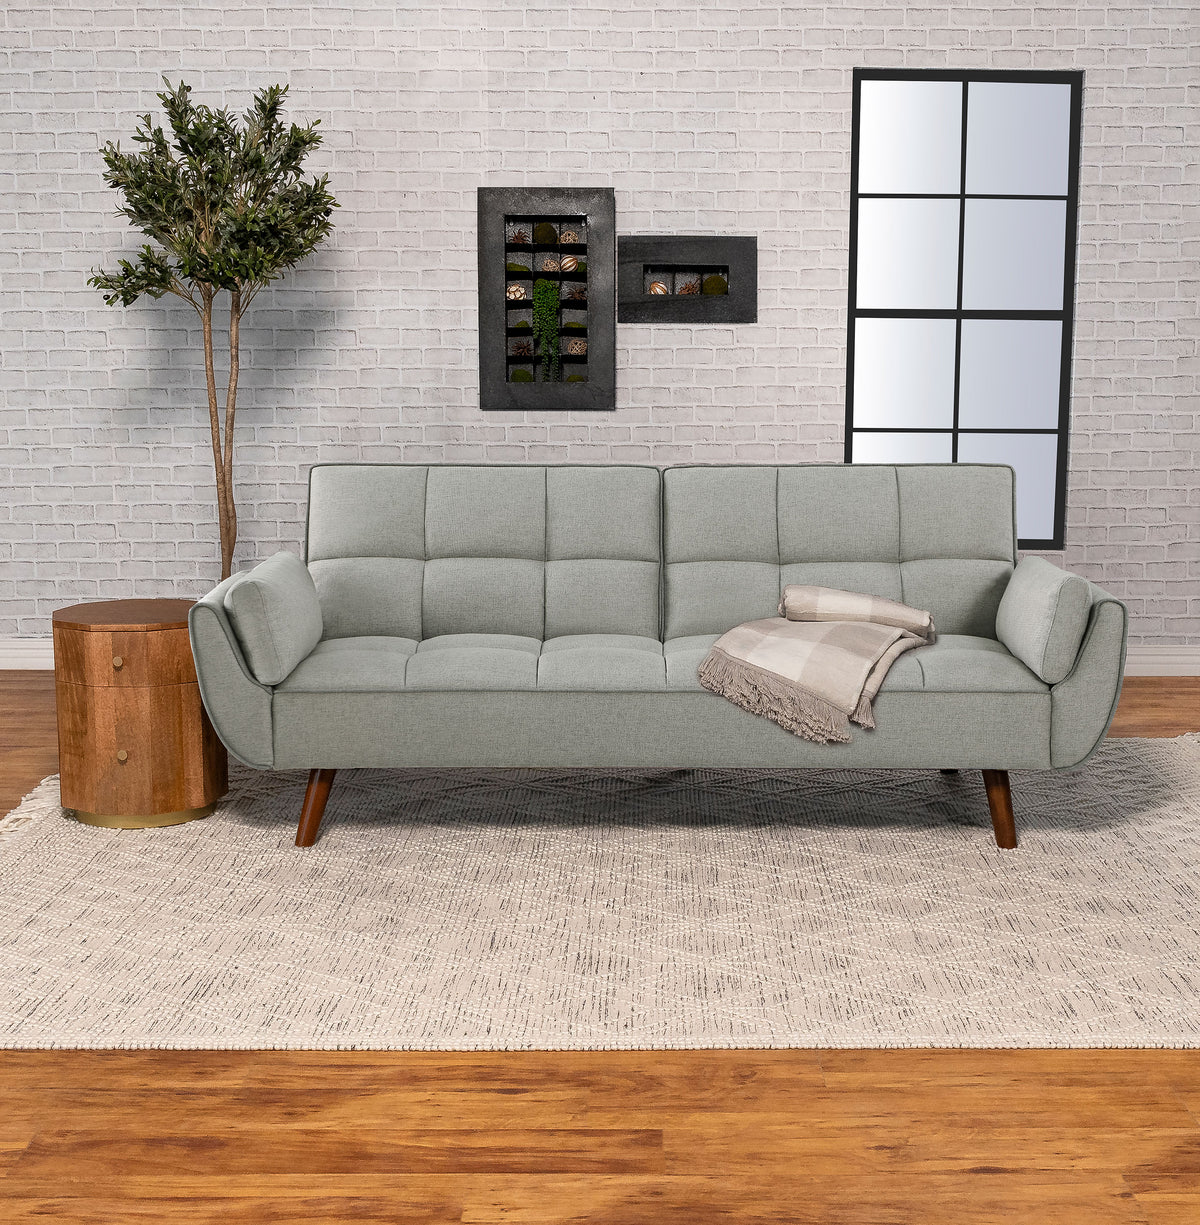 Caufield Upholstered Buscuit Tufted Covertible Sofa Bed Grey  Las Vegas Furniture Stores